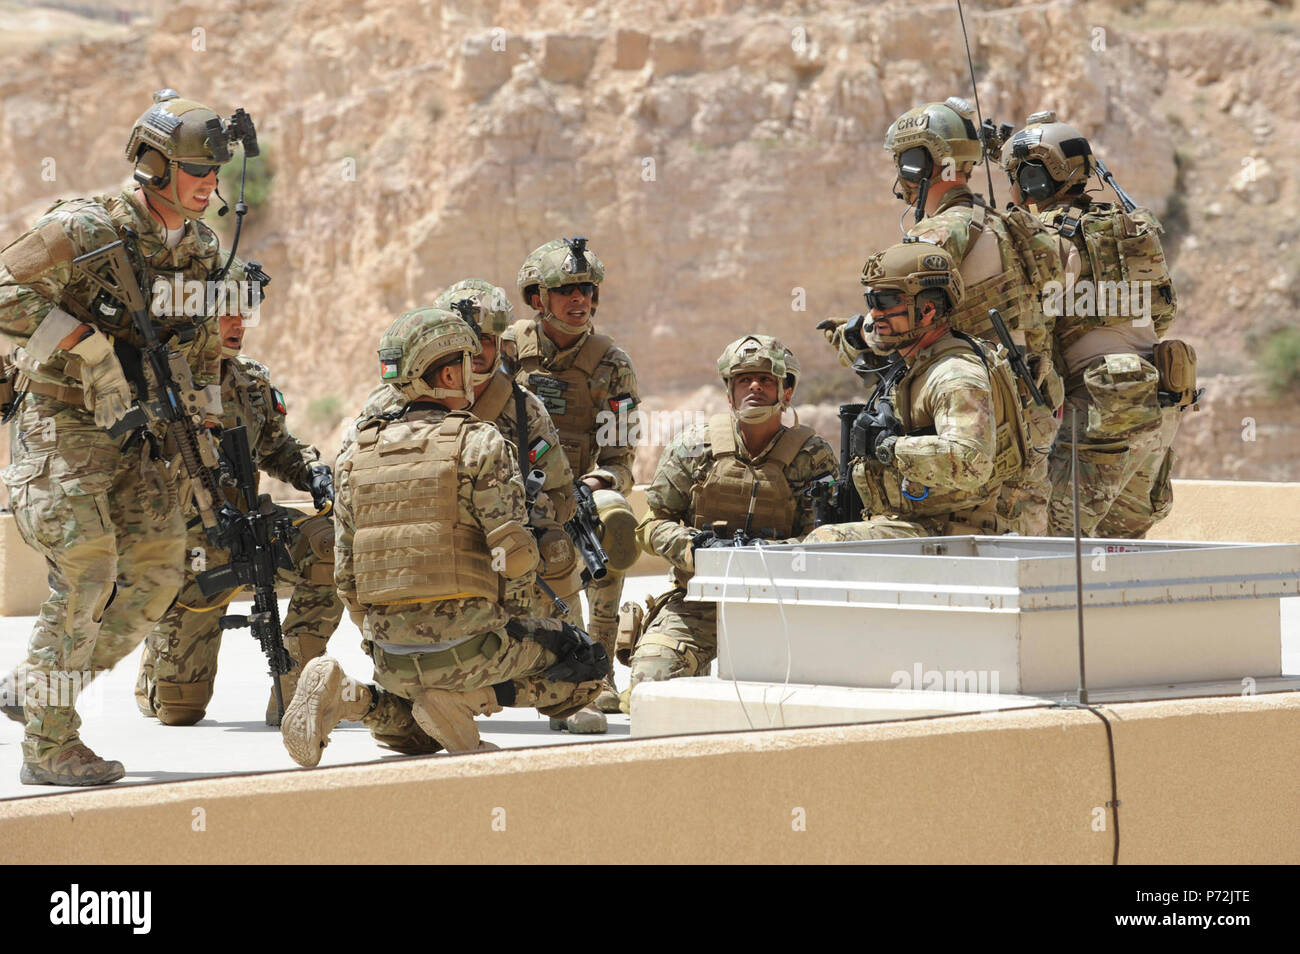 Jordan (May 11, 2017) Members of the Jordanian Armed Forces Special Task Force, U.S. Air Force Special Operations, and Italian Special Operations Wing, prepare to enter a building via rooftop, during an interoperability combat search and rescue training at the King Abdullah II Special Operations Training Center, as part of Exercise Eager Lion. Eager Lion is an annual U.S. Central Command exercise in Jordan designed to strengthen military-to-military relationships between the U.S., Jordan and other international partners. This year's iteration is comprised of about 7,200 military personnel from Stock Photo